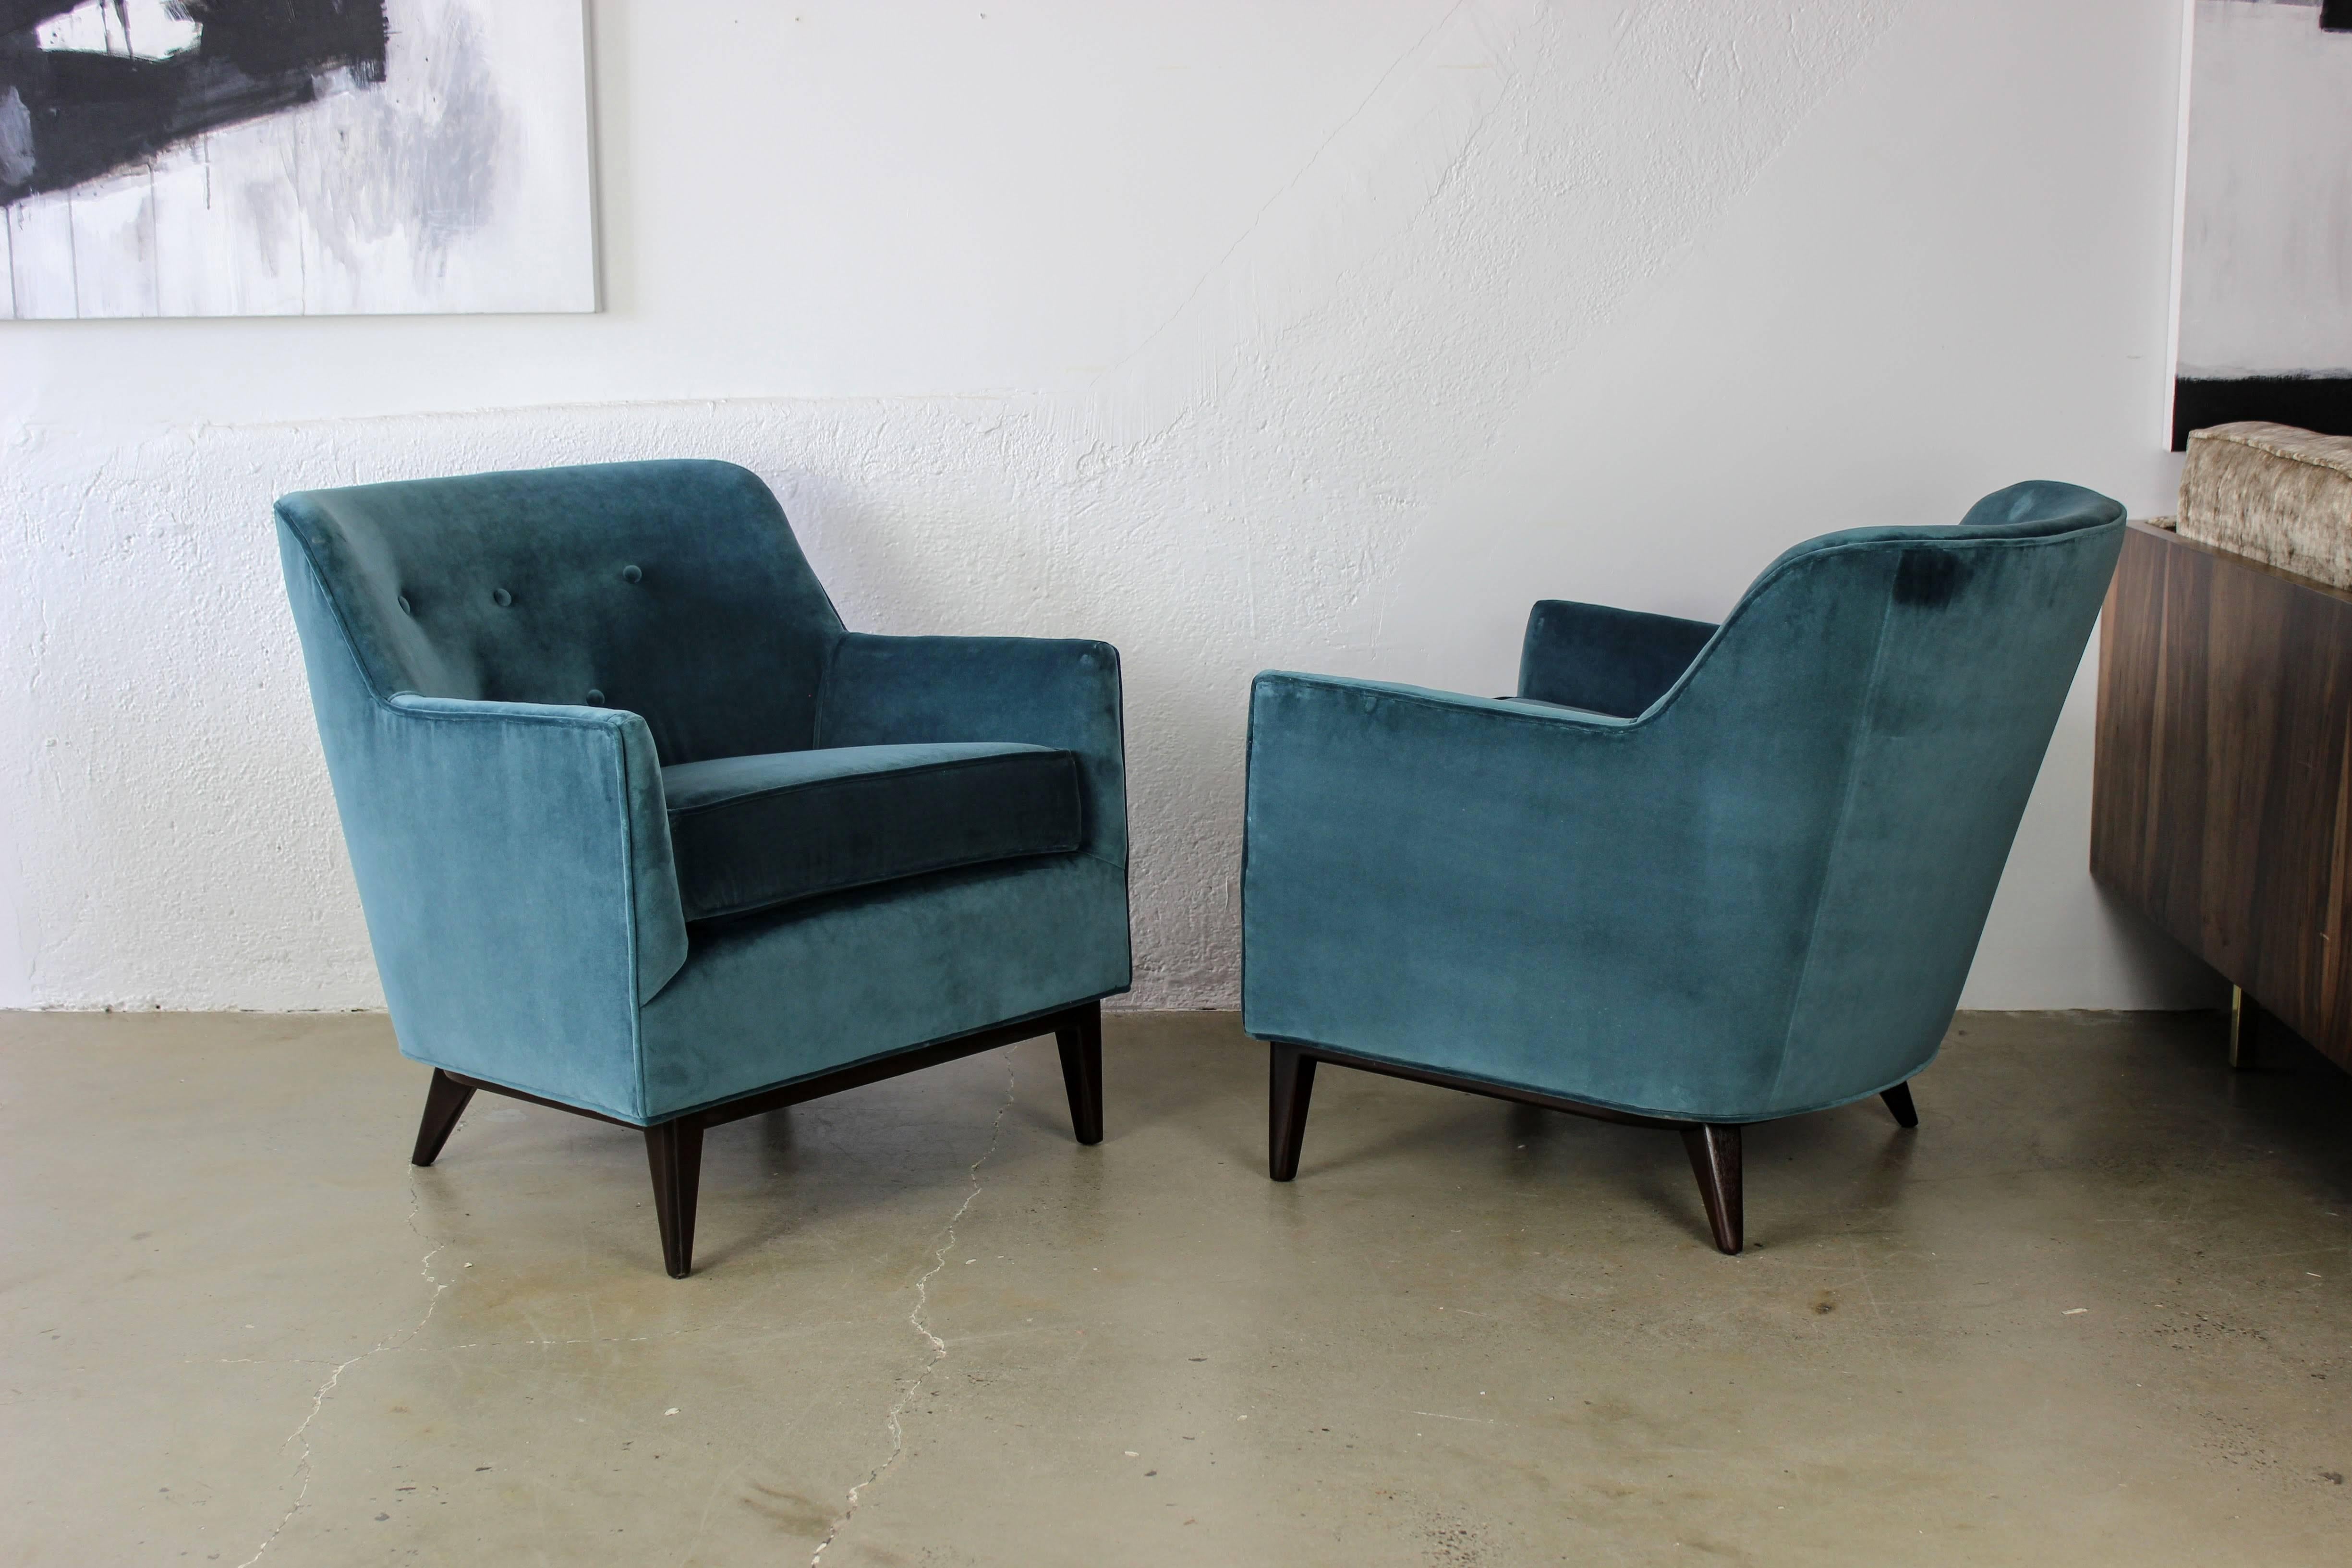 Mid-20th Century Handsome Mid-Century Lounge Chairs After Edward Wormley, 1950s